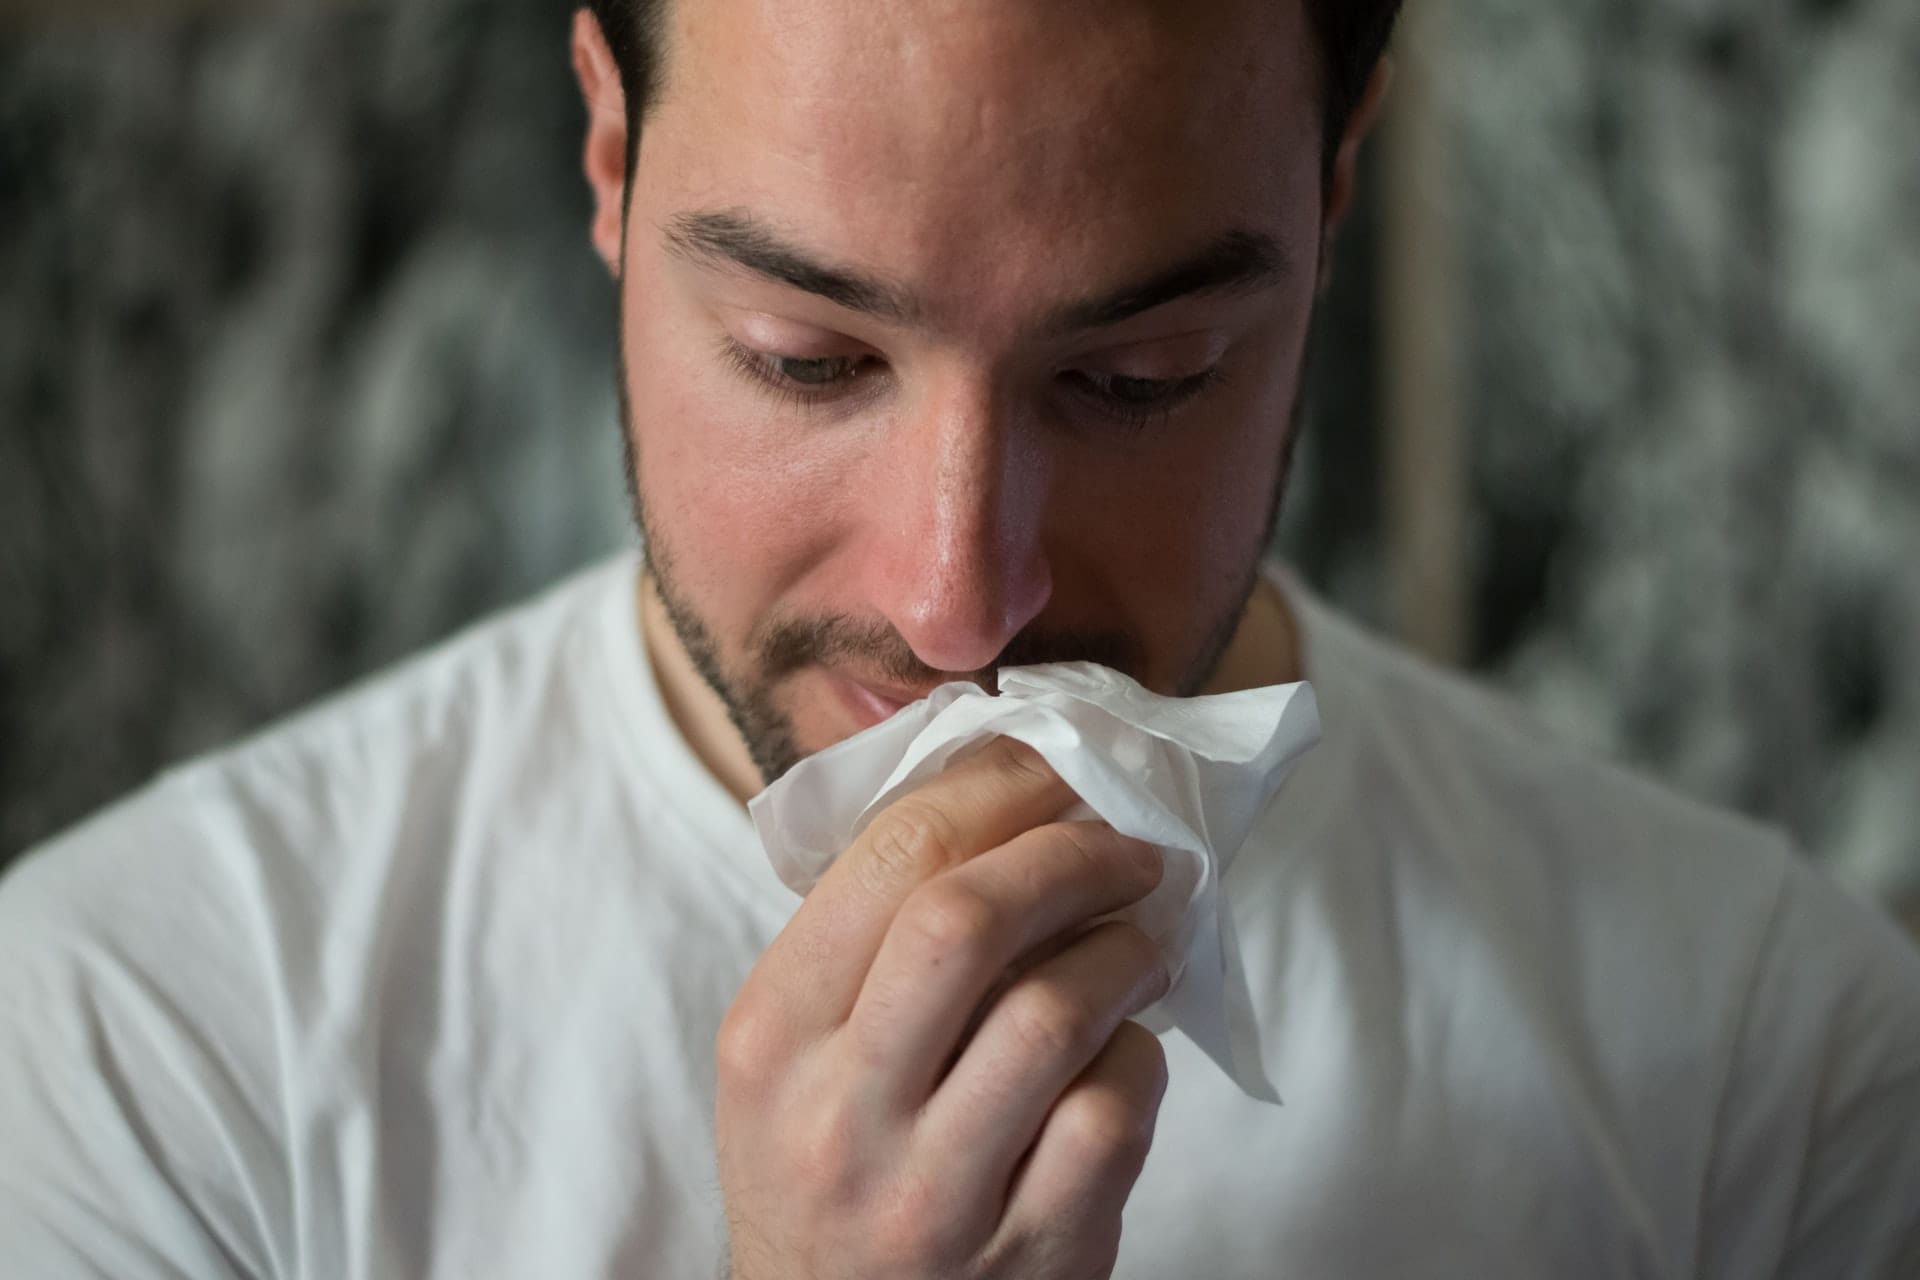 Tired of a runny nose? Reach for home remedies